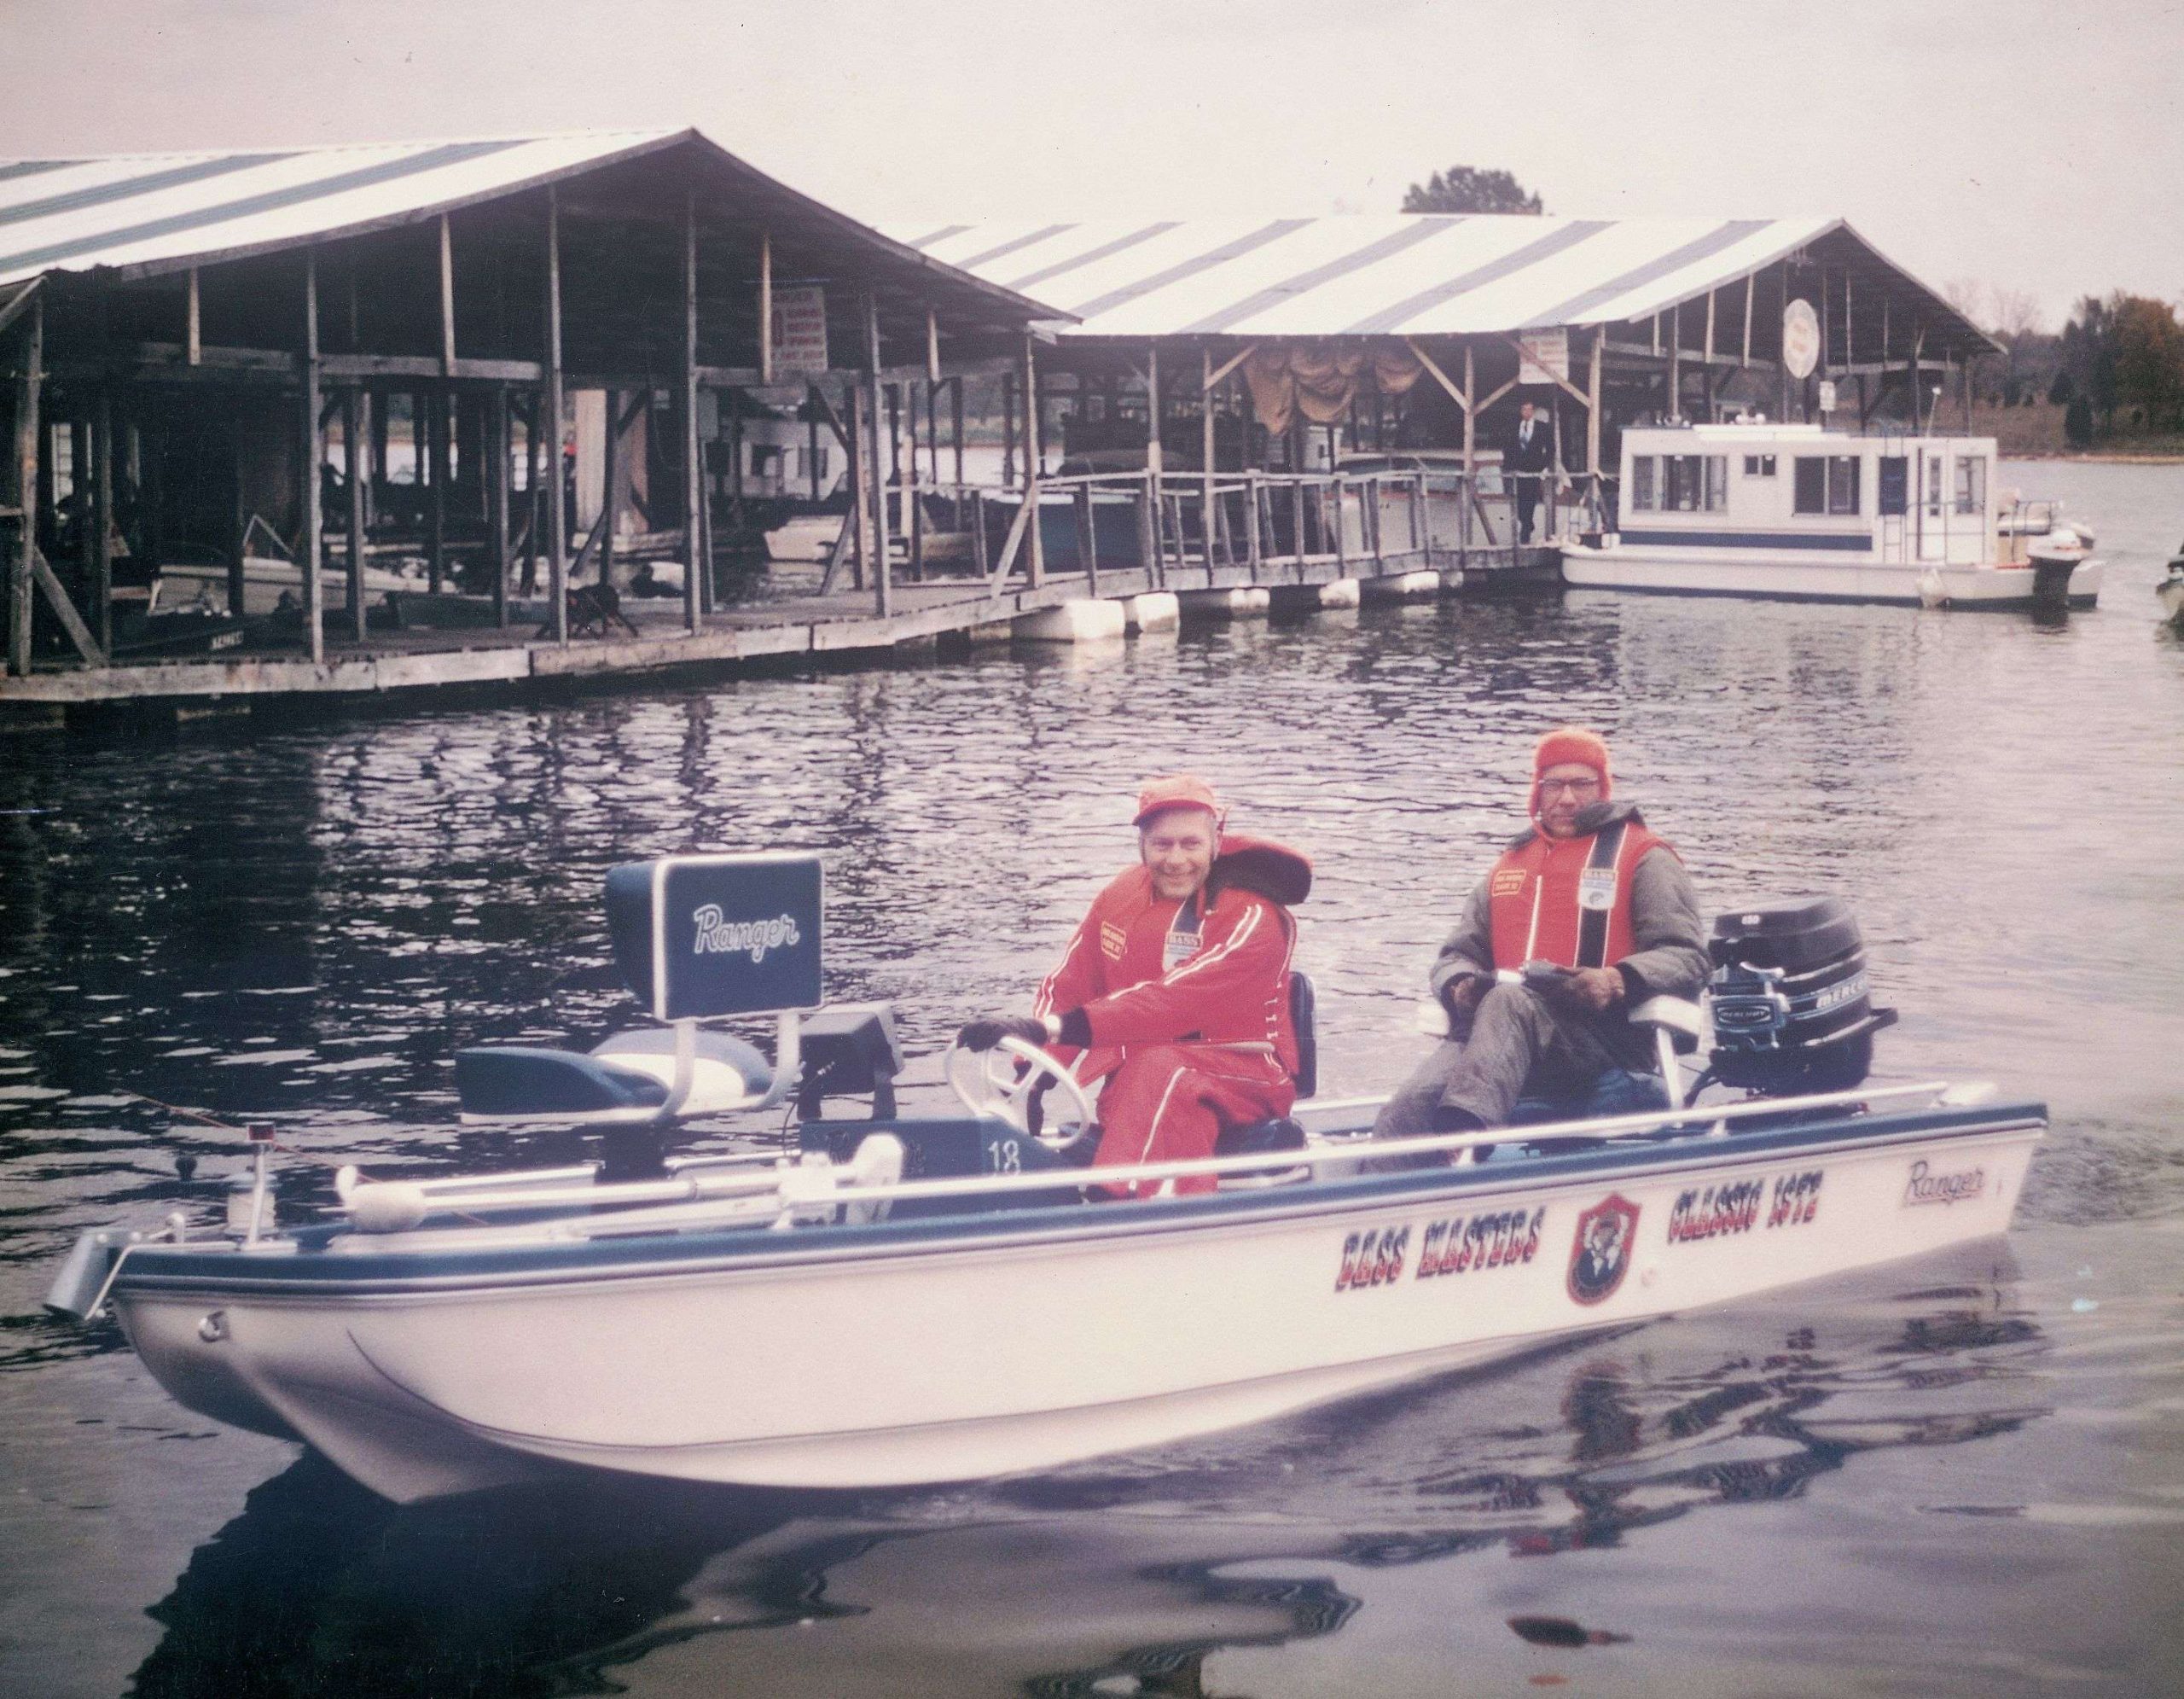 1972 was a monumental year for Wood and Ranger. Wood qualified for his first of two Bassmaster Classics. Ranger also became the official boat of the Bassmaster Classic. The second Classic was on Percy Priest Lake, outside of Nashville. 